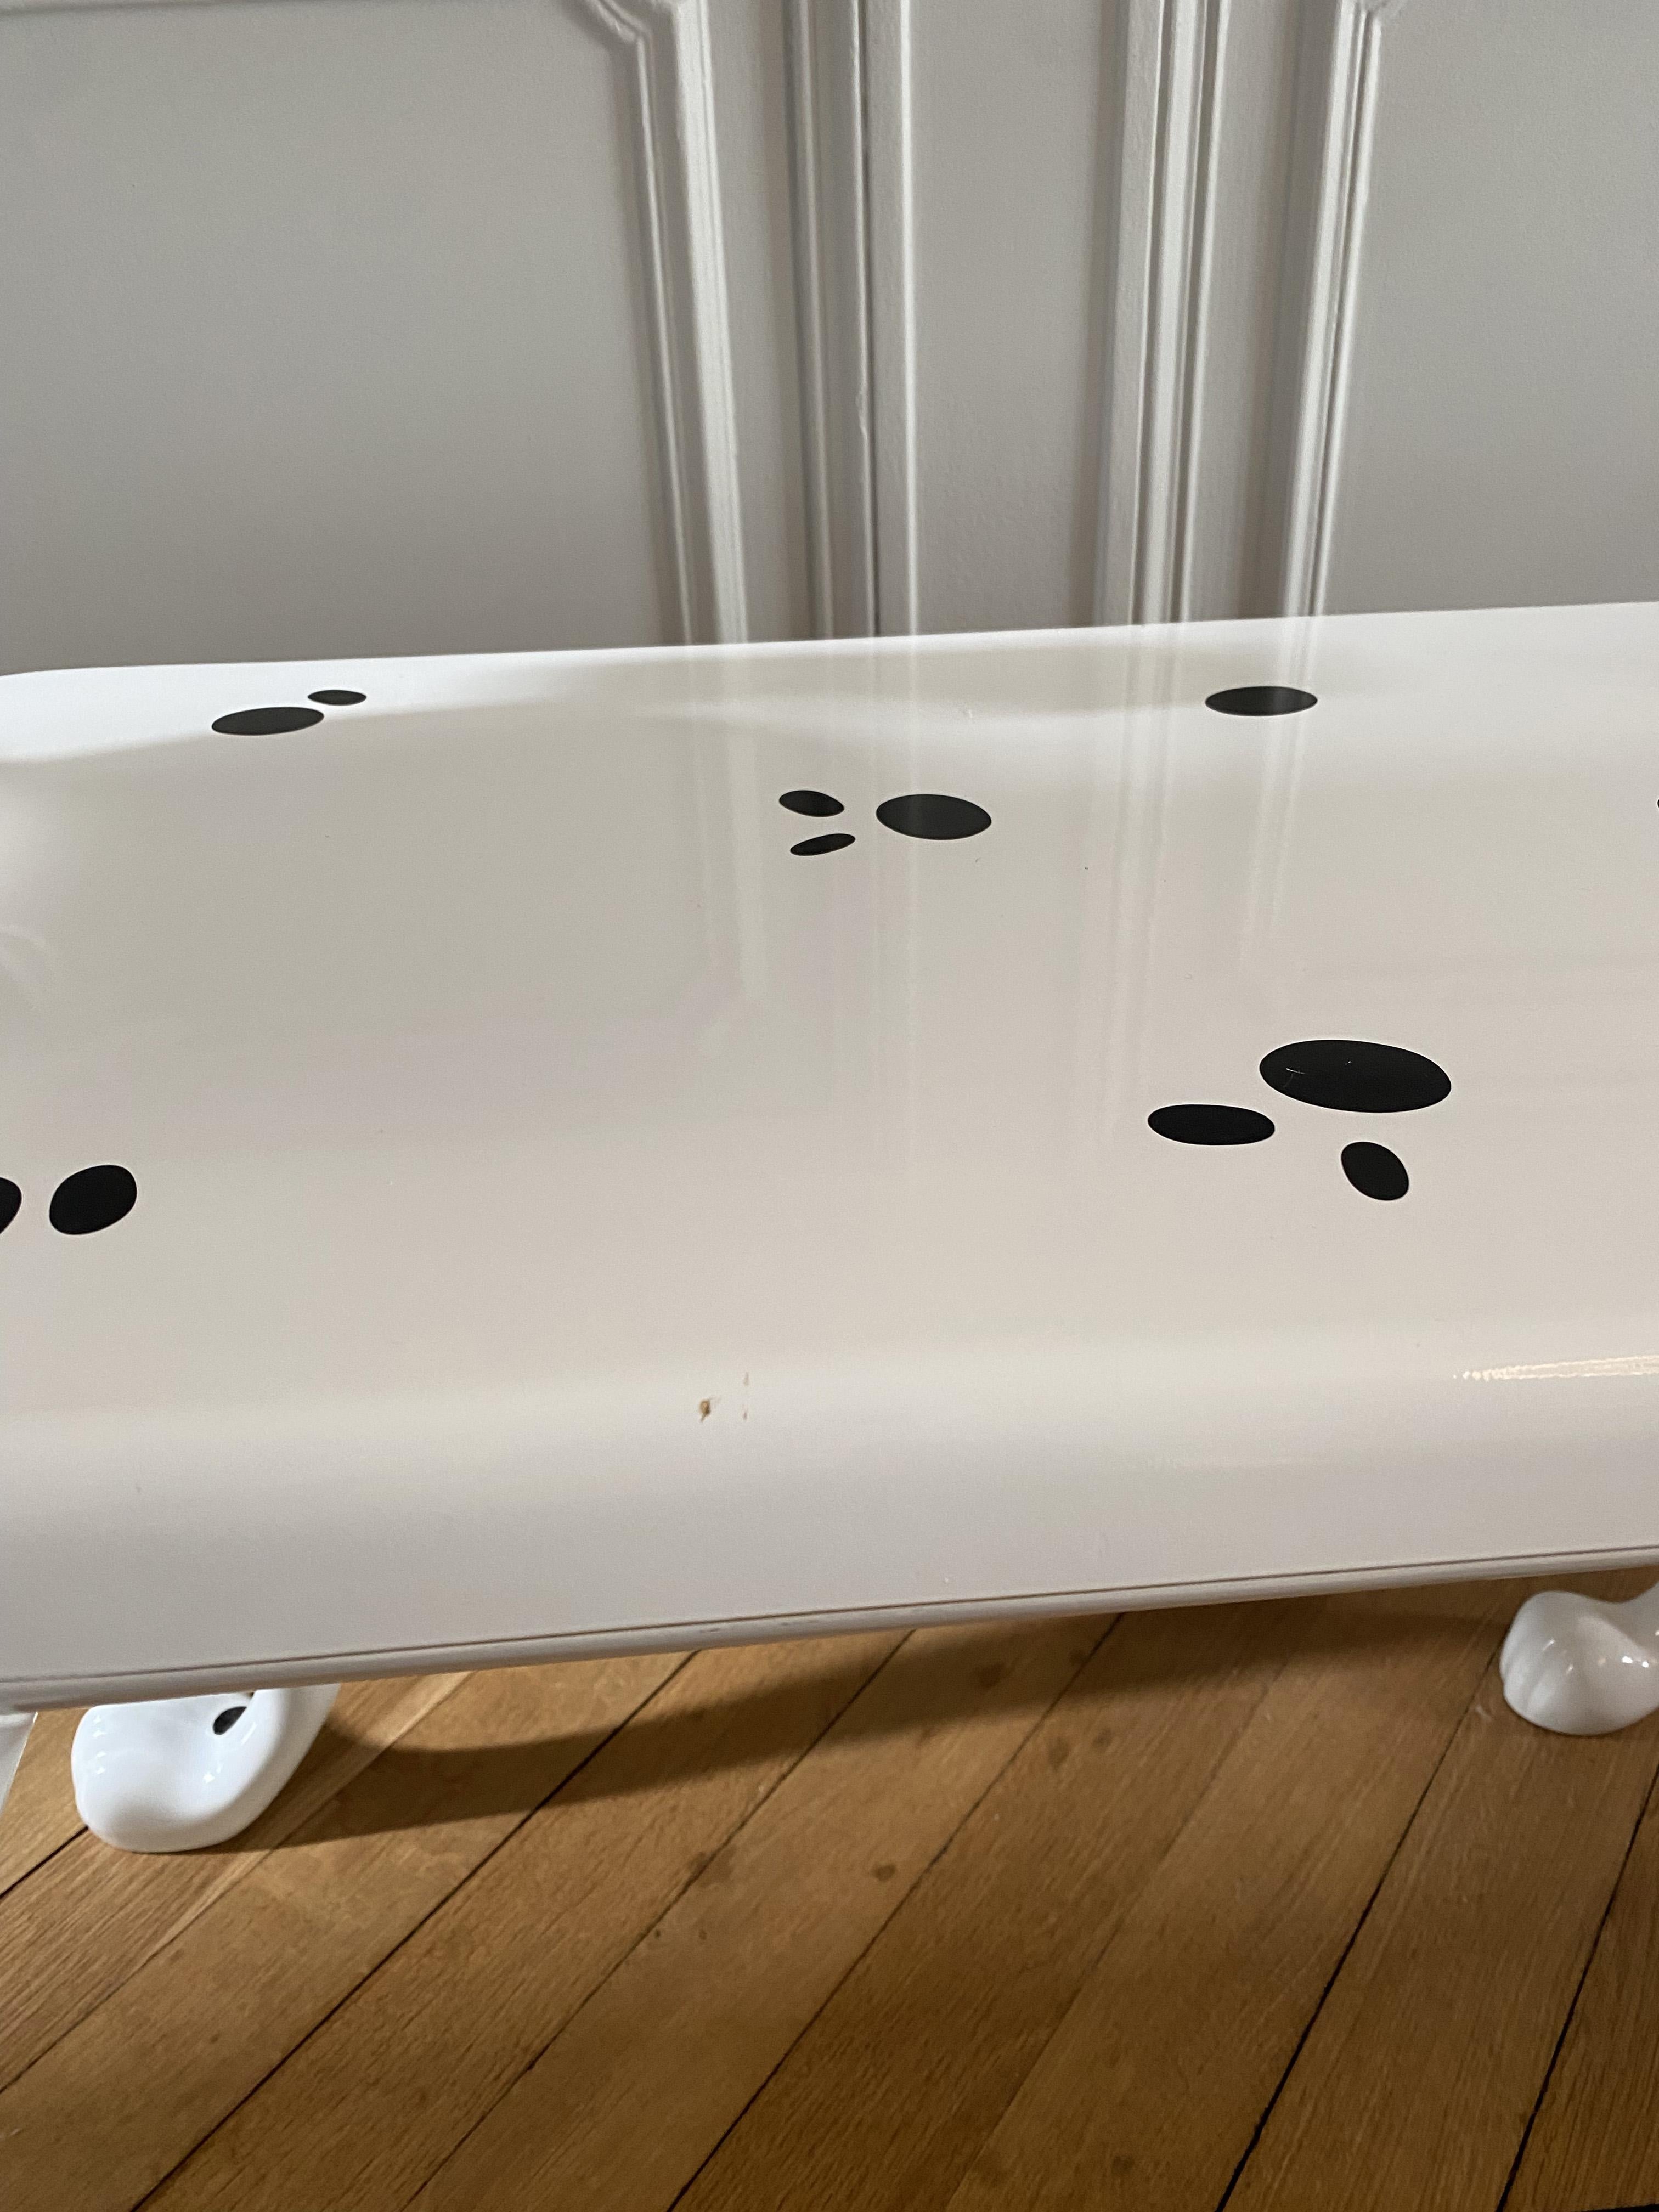 Late 20th Century Postmodern Dalmatian Pongo Desk by Pierre Colleu for Starform and Disney, 1980s. For Sale